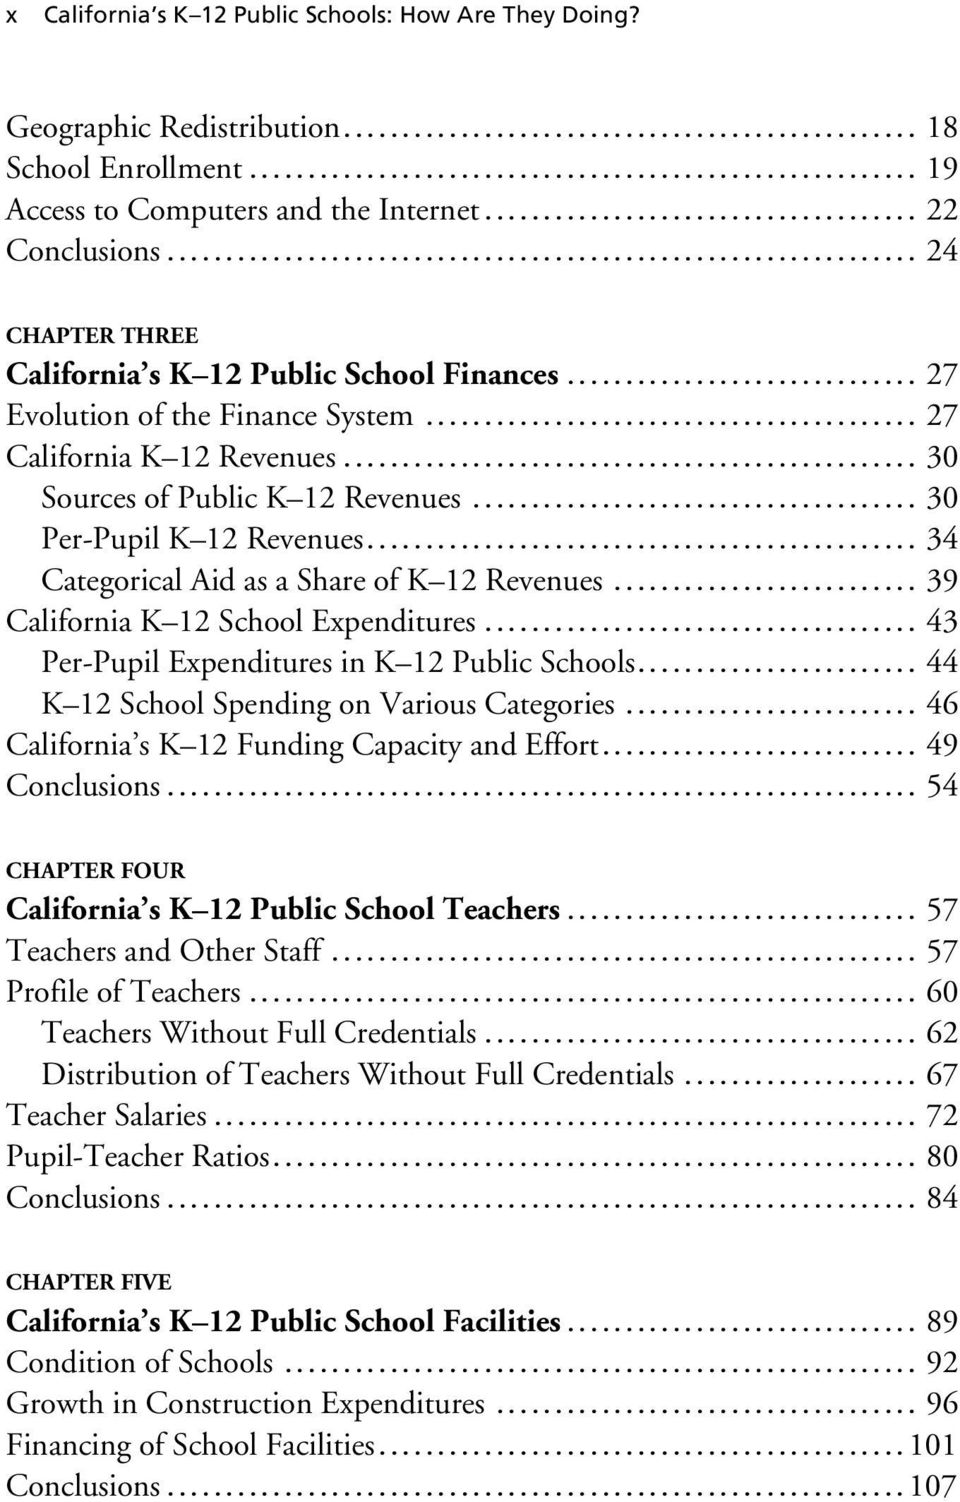 .. 34 Categorical Aid as a Share of K 12 Revenues... 39 California K 12 School Expenditures... 43 Per-Pupil Expenditures in K 12 Public Schools... 44 K 12 School Spending on Various Categories.